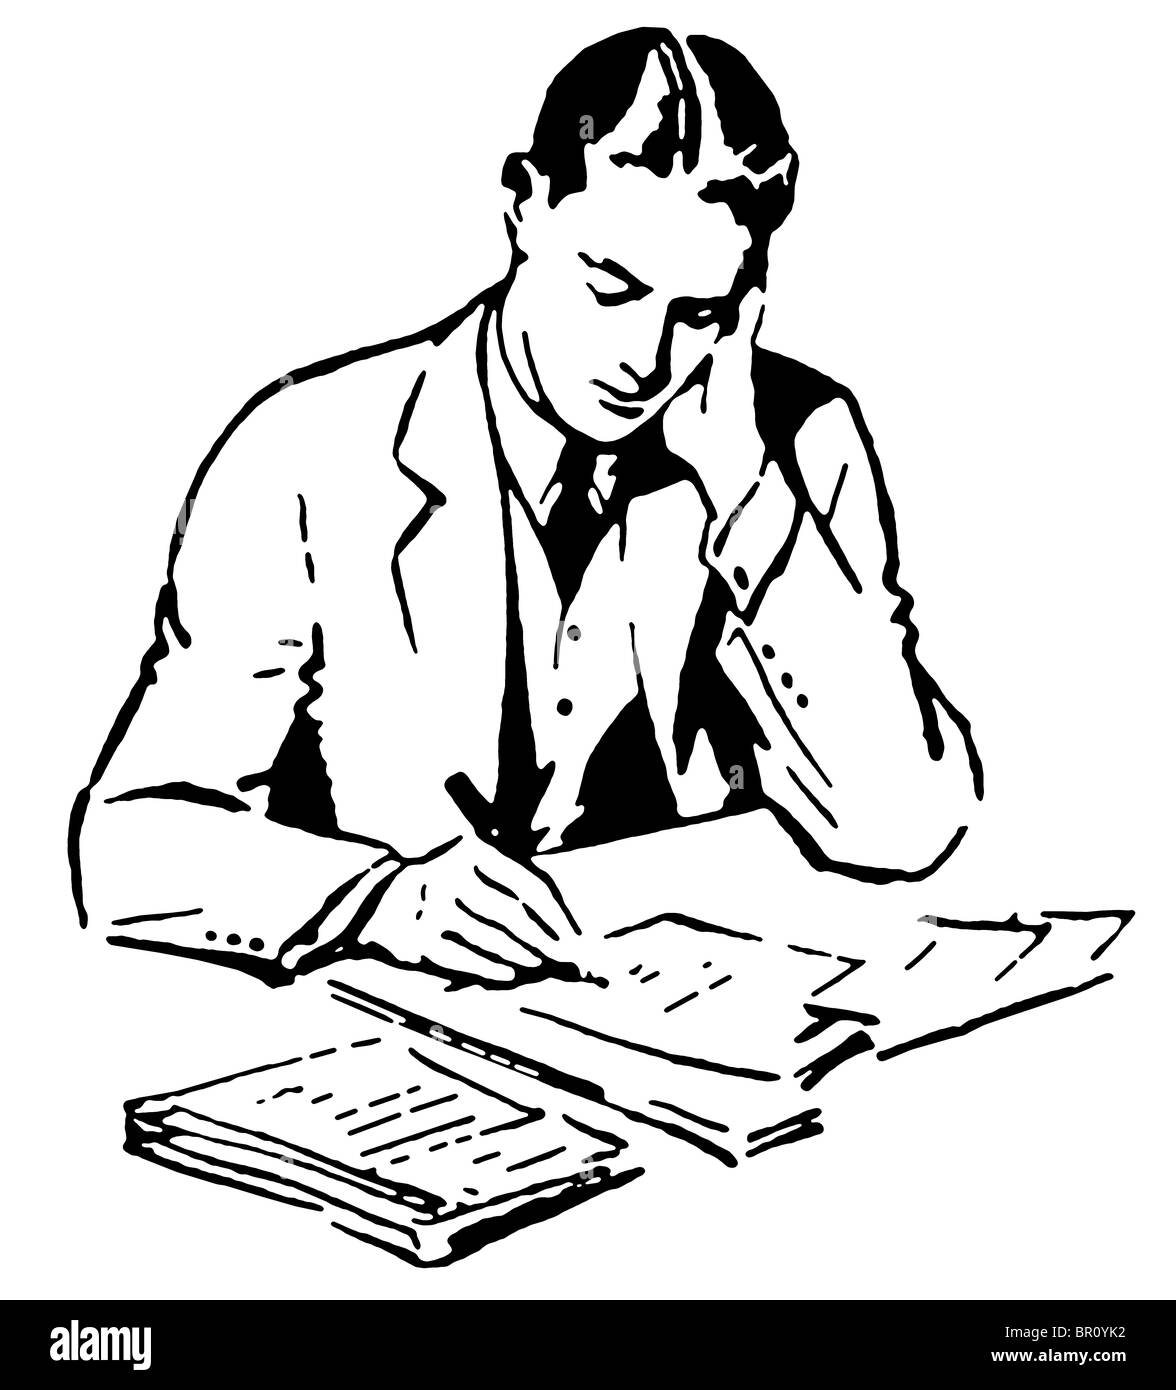 A black and white version of a graphic illustration of a business man working hard at his desk Stock Photo